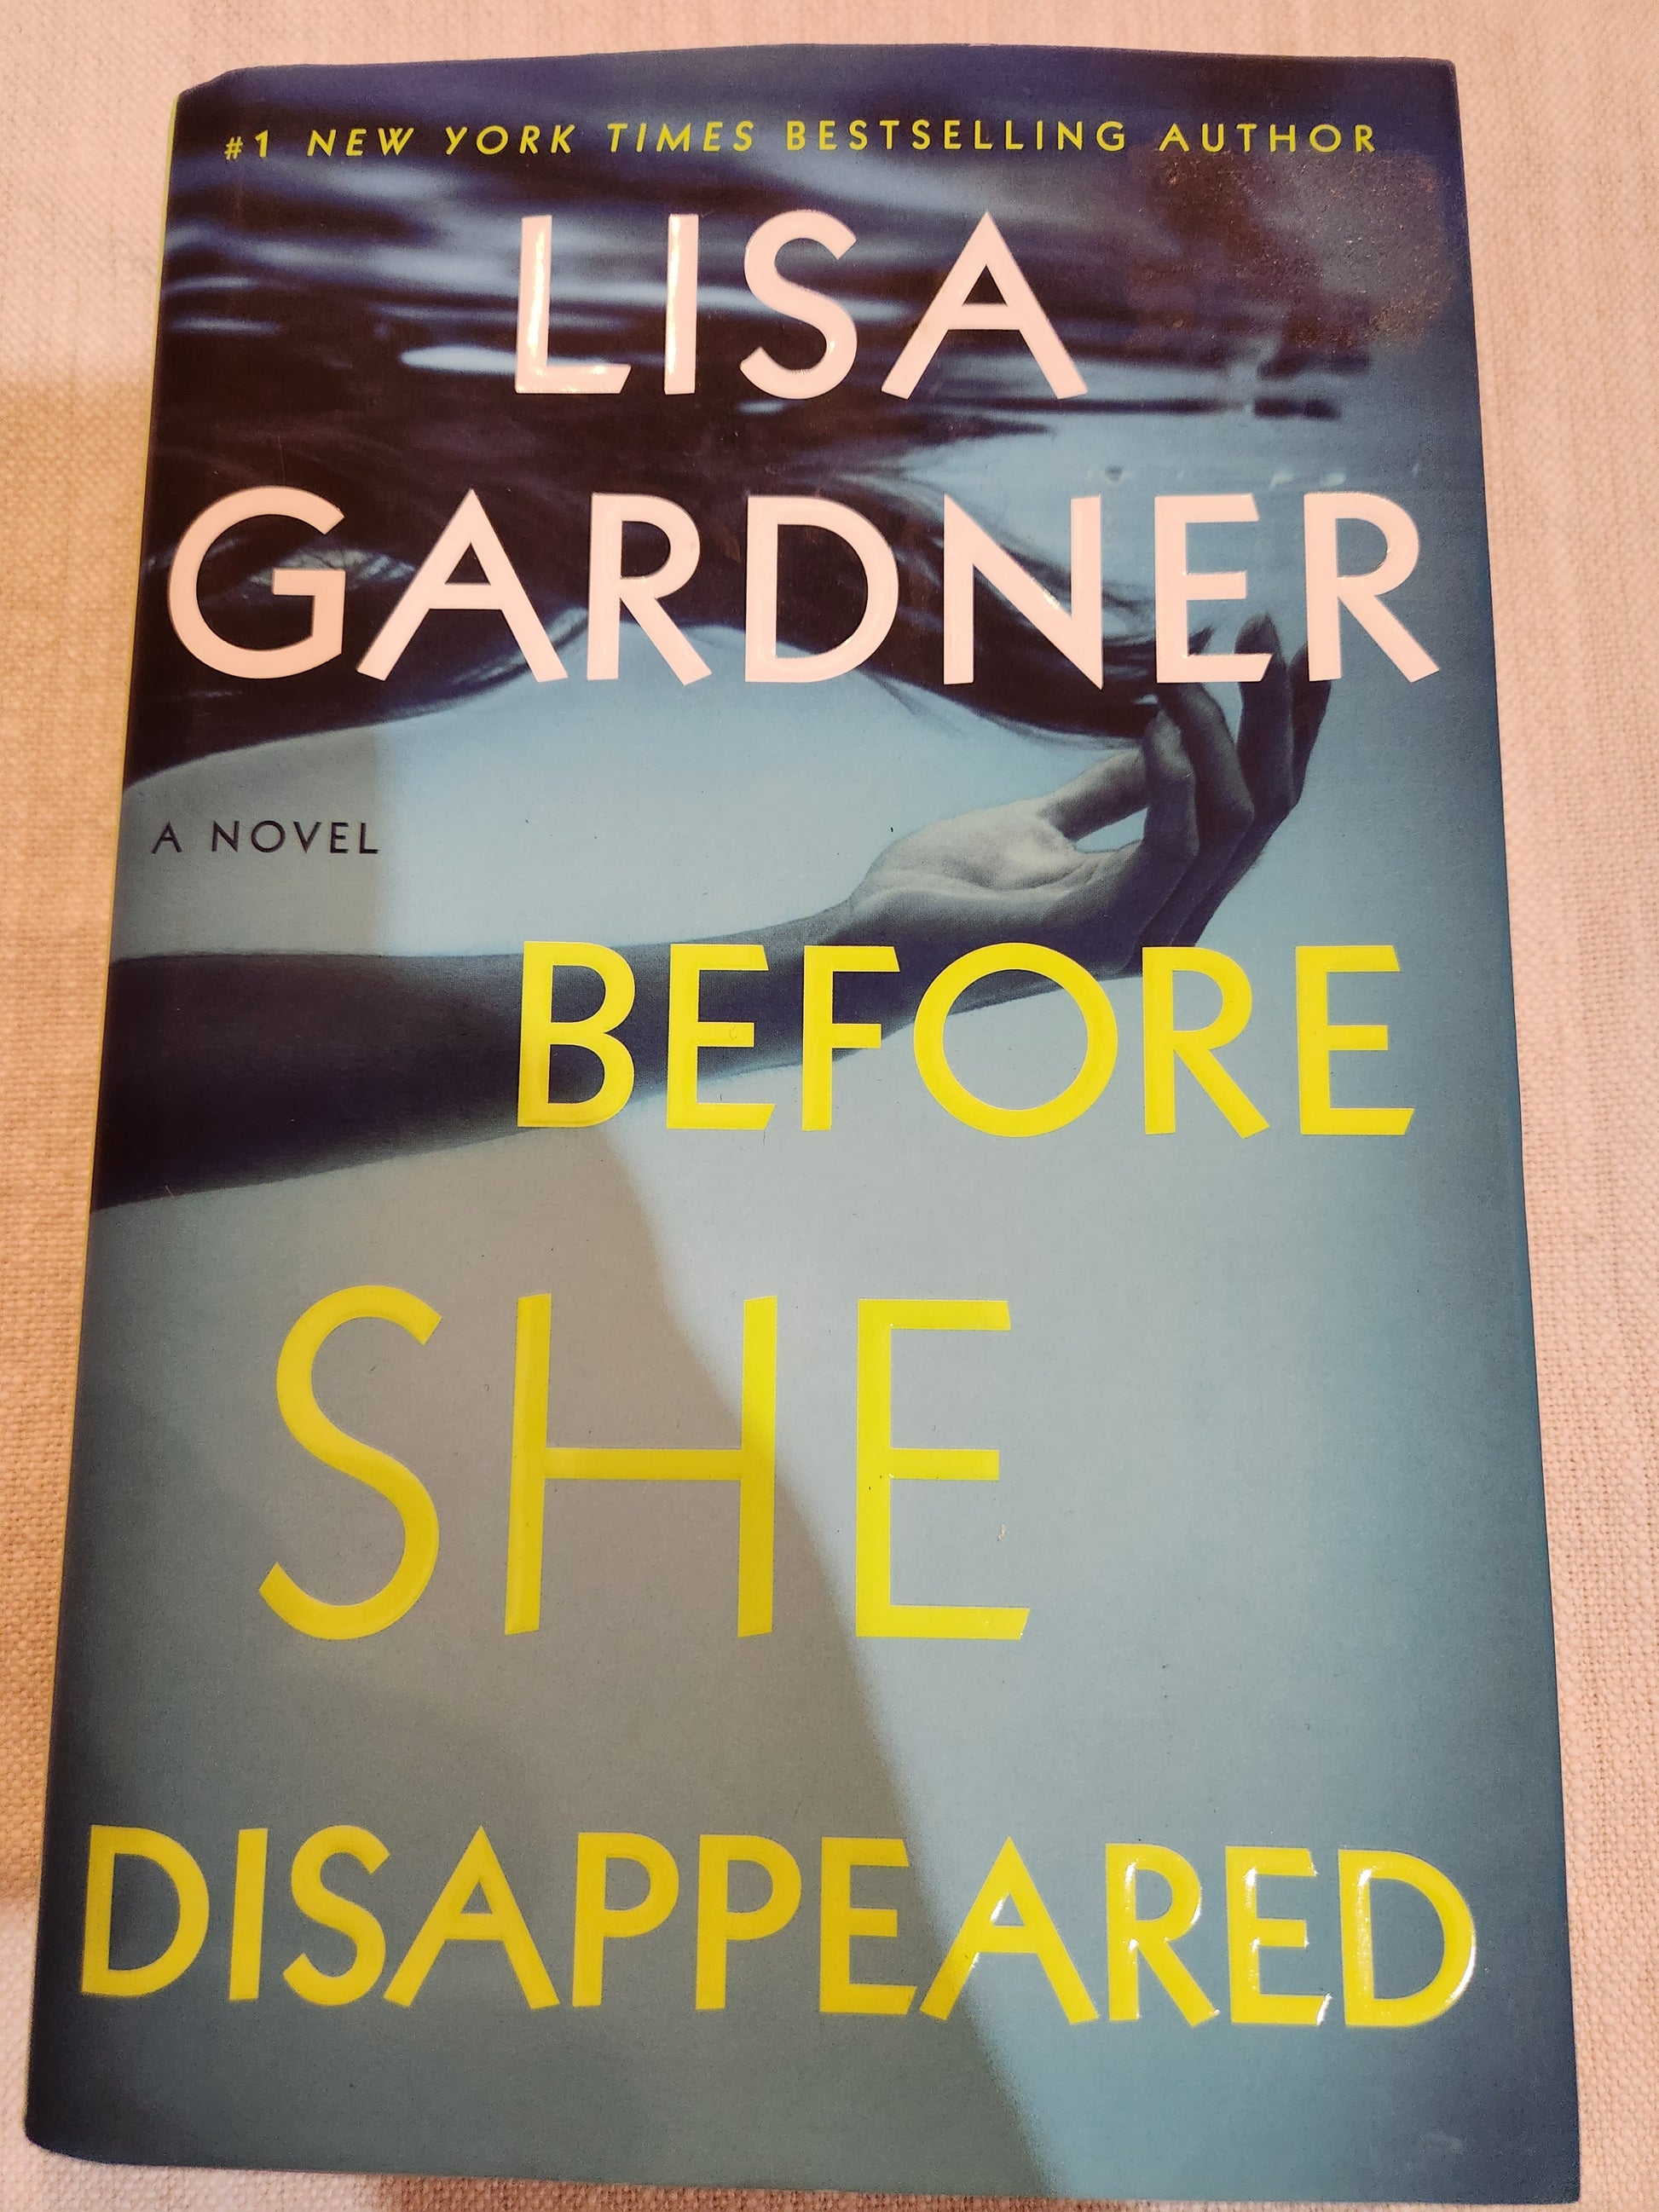 "Before She Disappeared" by Lisa Gardner - Dead Tree Dreams Bookstore